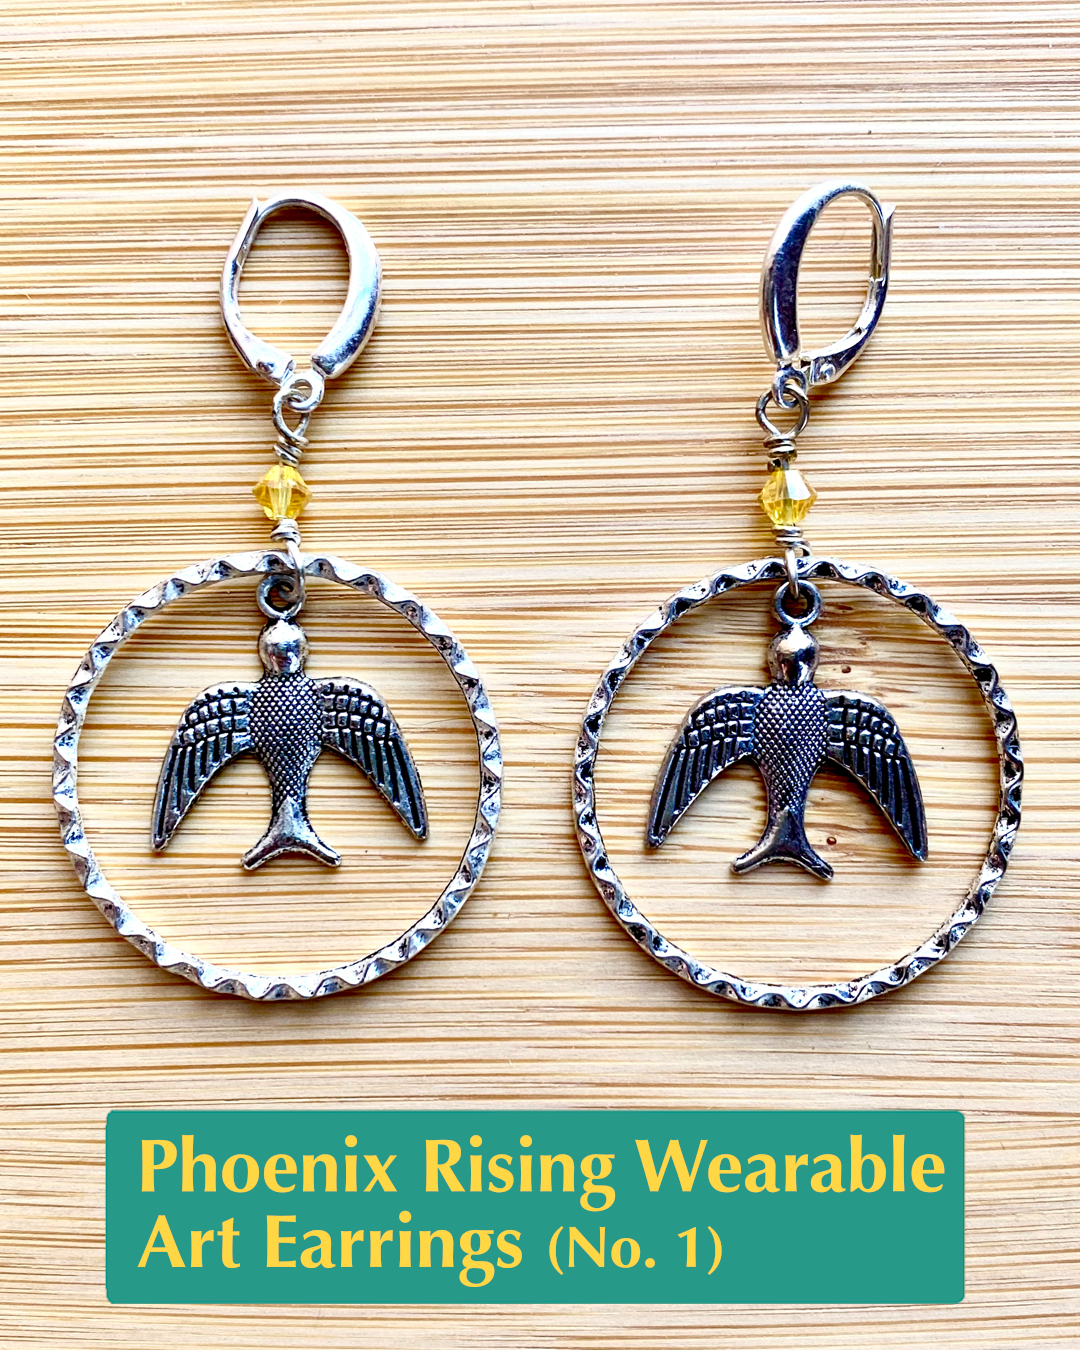 Handmade, wearable art lever back earrings with yellow crystal accents, a silver bird charm dangle, inside of textured hoops